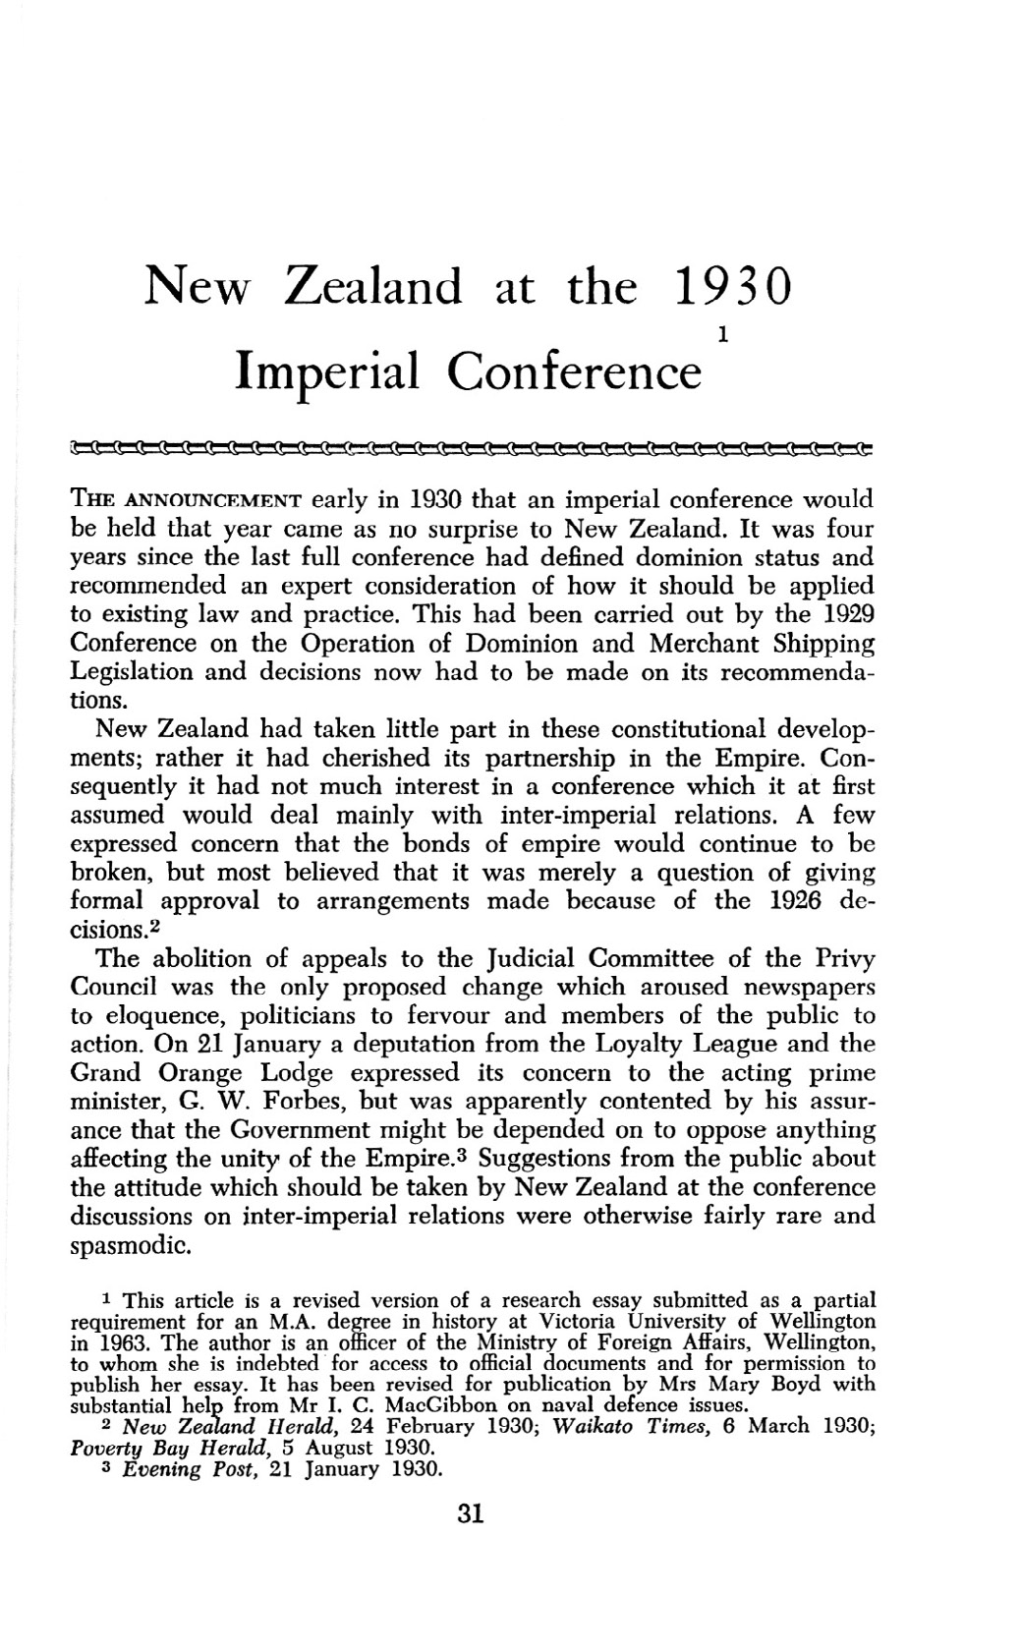 New Zealand at the 1930 Imperial Conference, by Priscilla Williams, P 31-48NZJH 05 1 04.Pdf